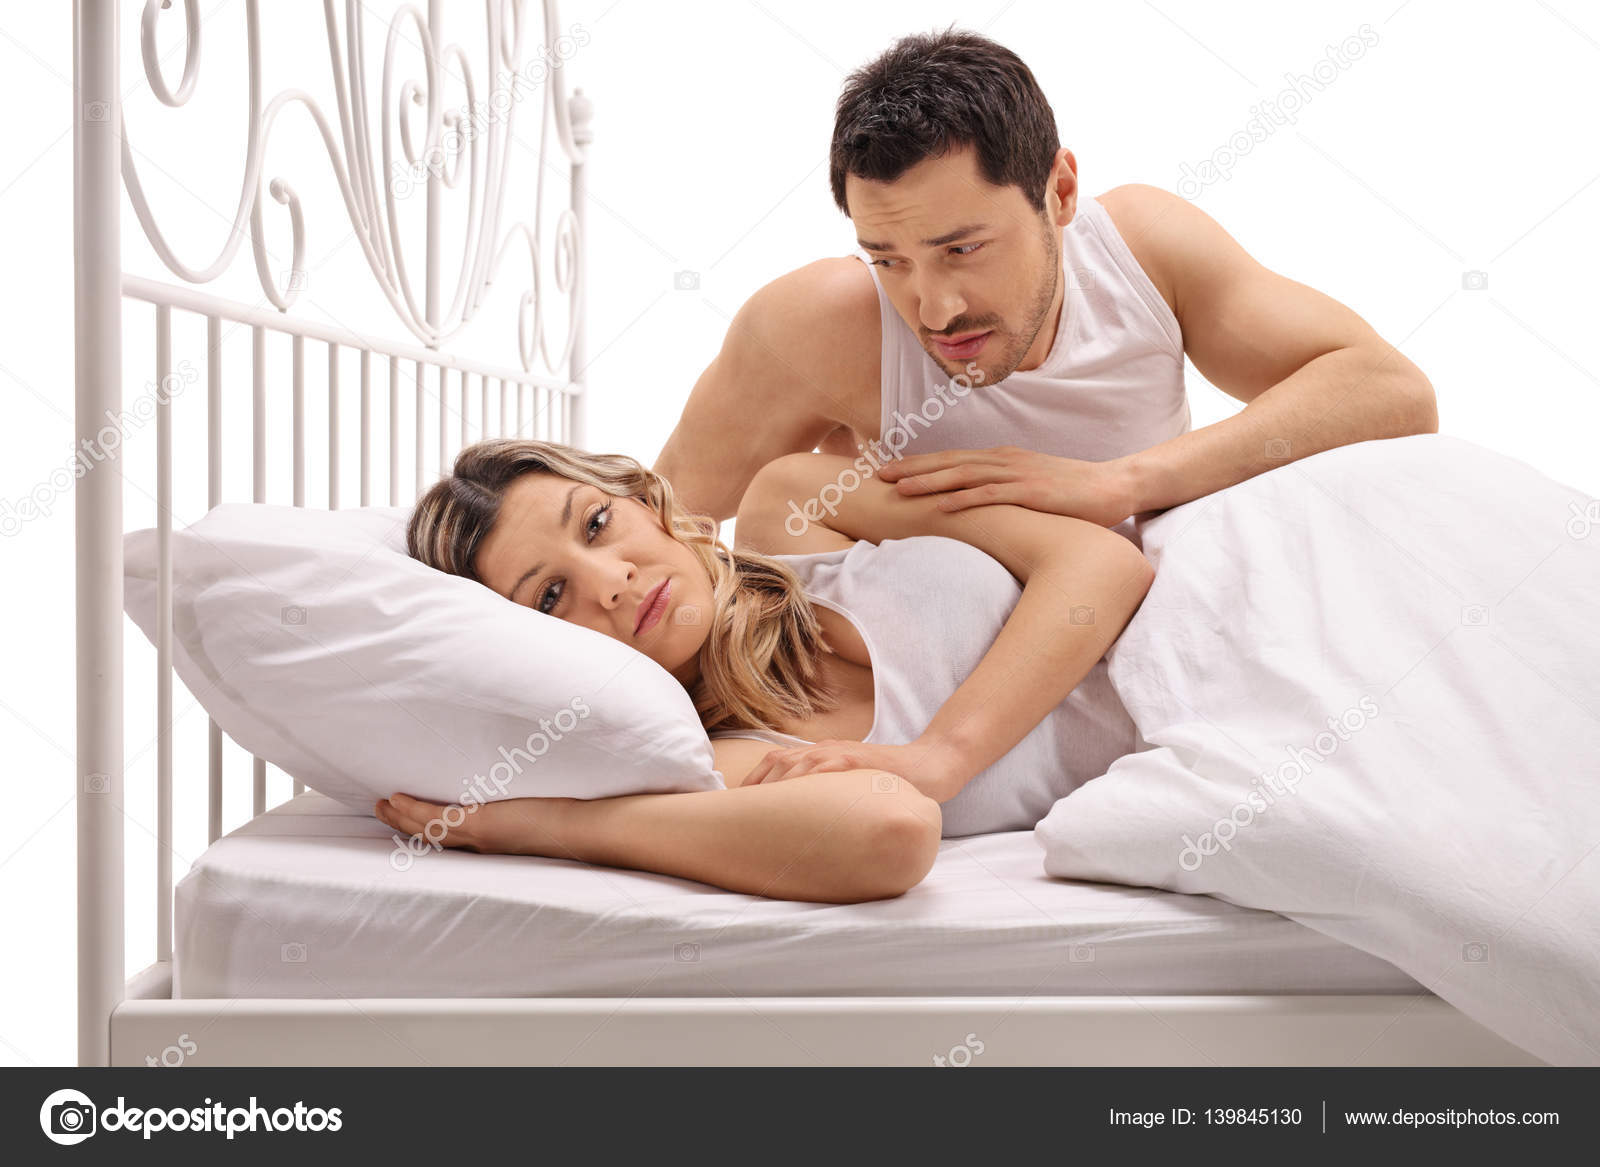 Unhappy woman in bed with concerned guy comforting her Stock Photo by ©ljsphotography 139845130